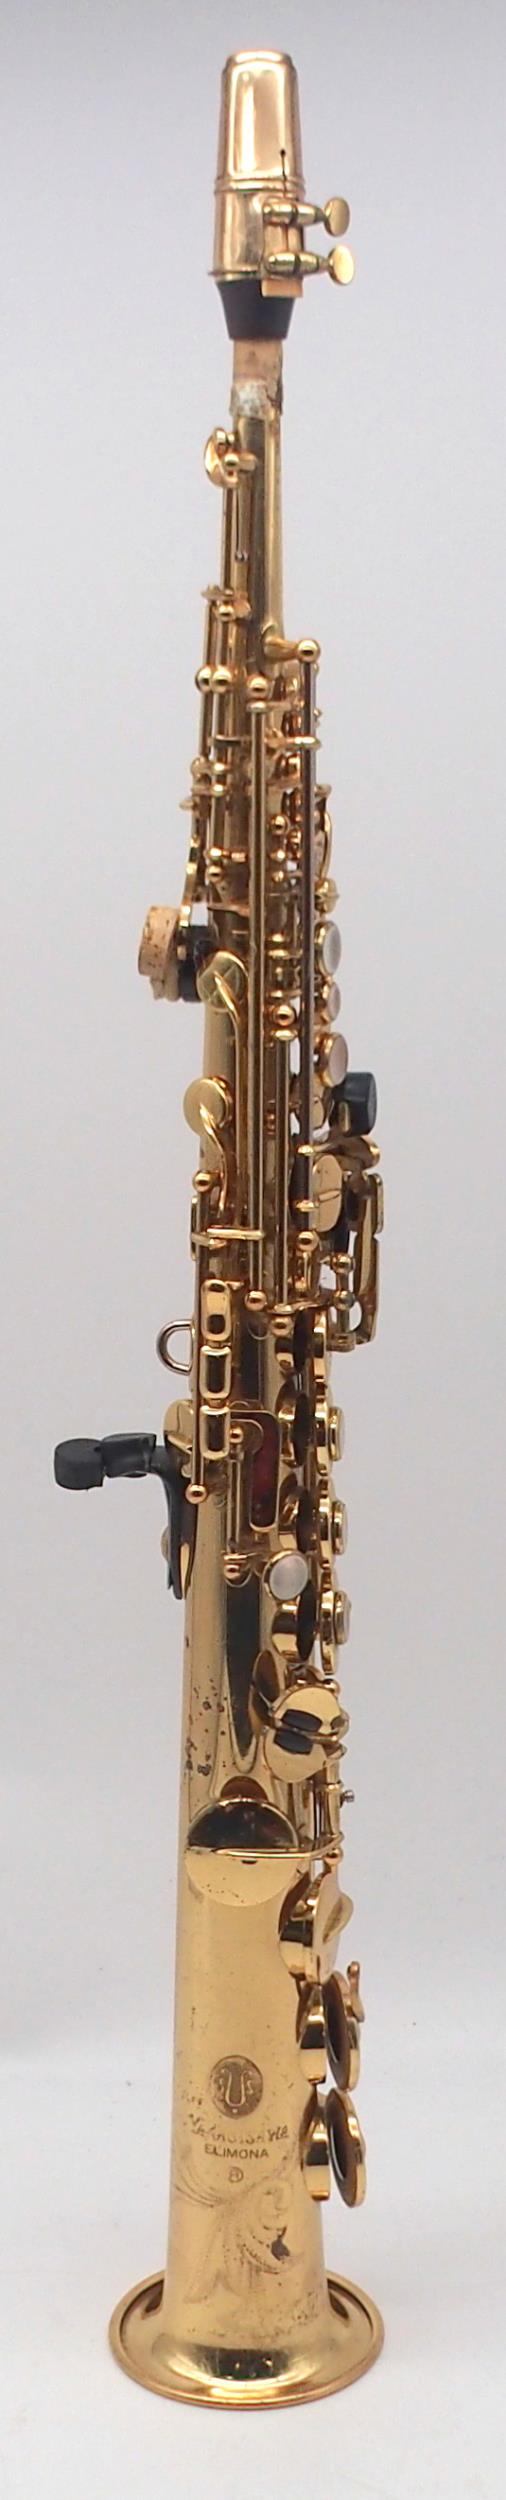 YANAGISAWA Elimona soprano saxophone serial number 00119353 JAPAN with fitted case Condition